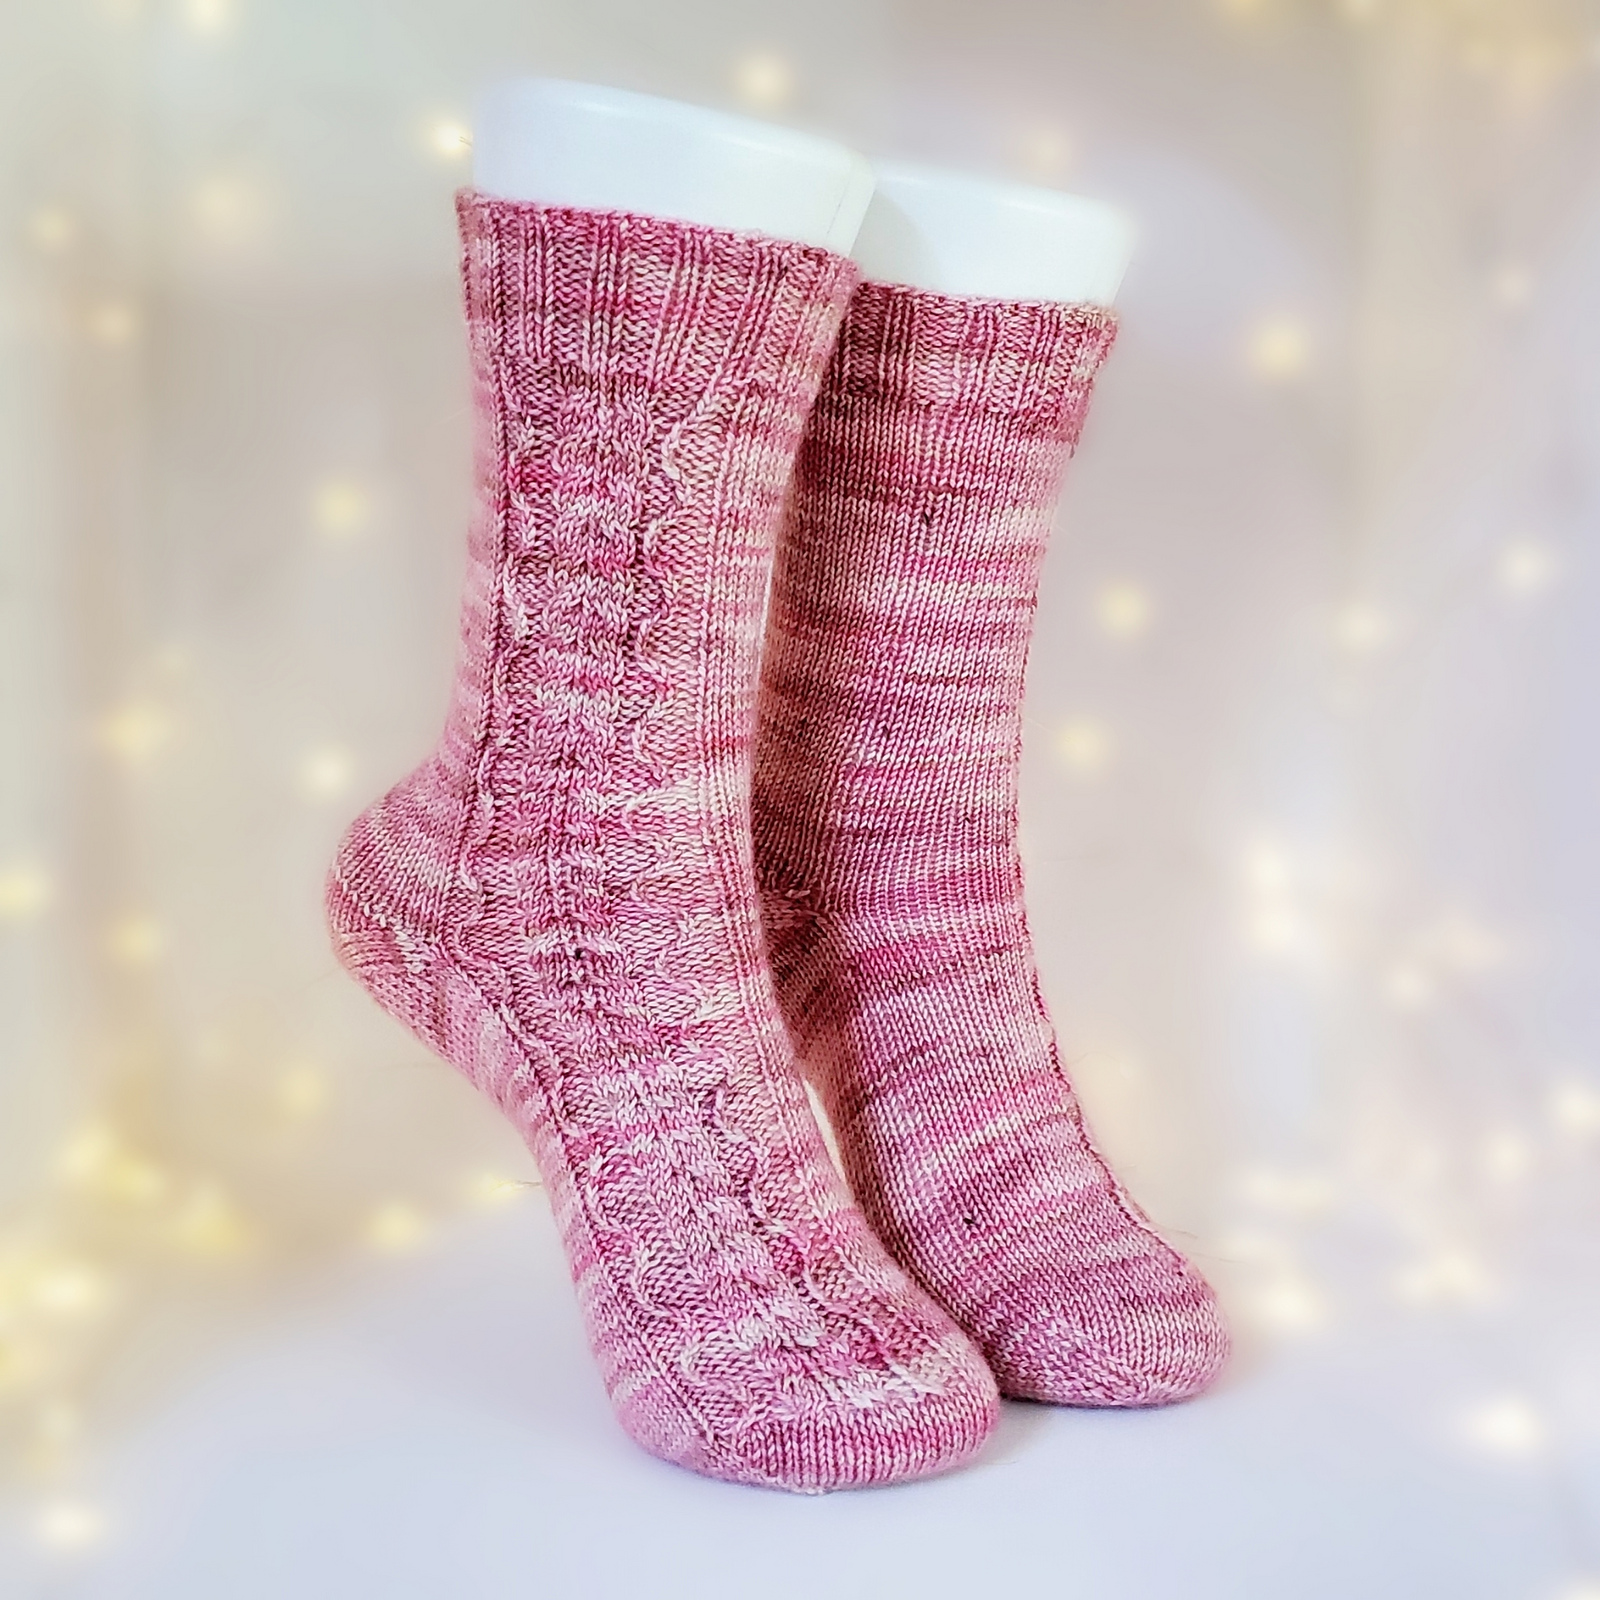 Pink tonal socks with cables running up the side of the instep.